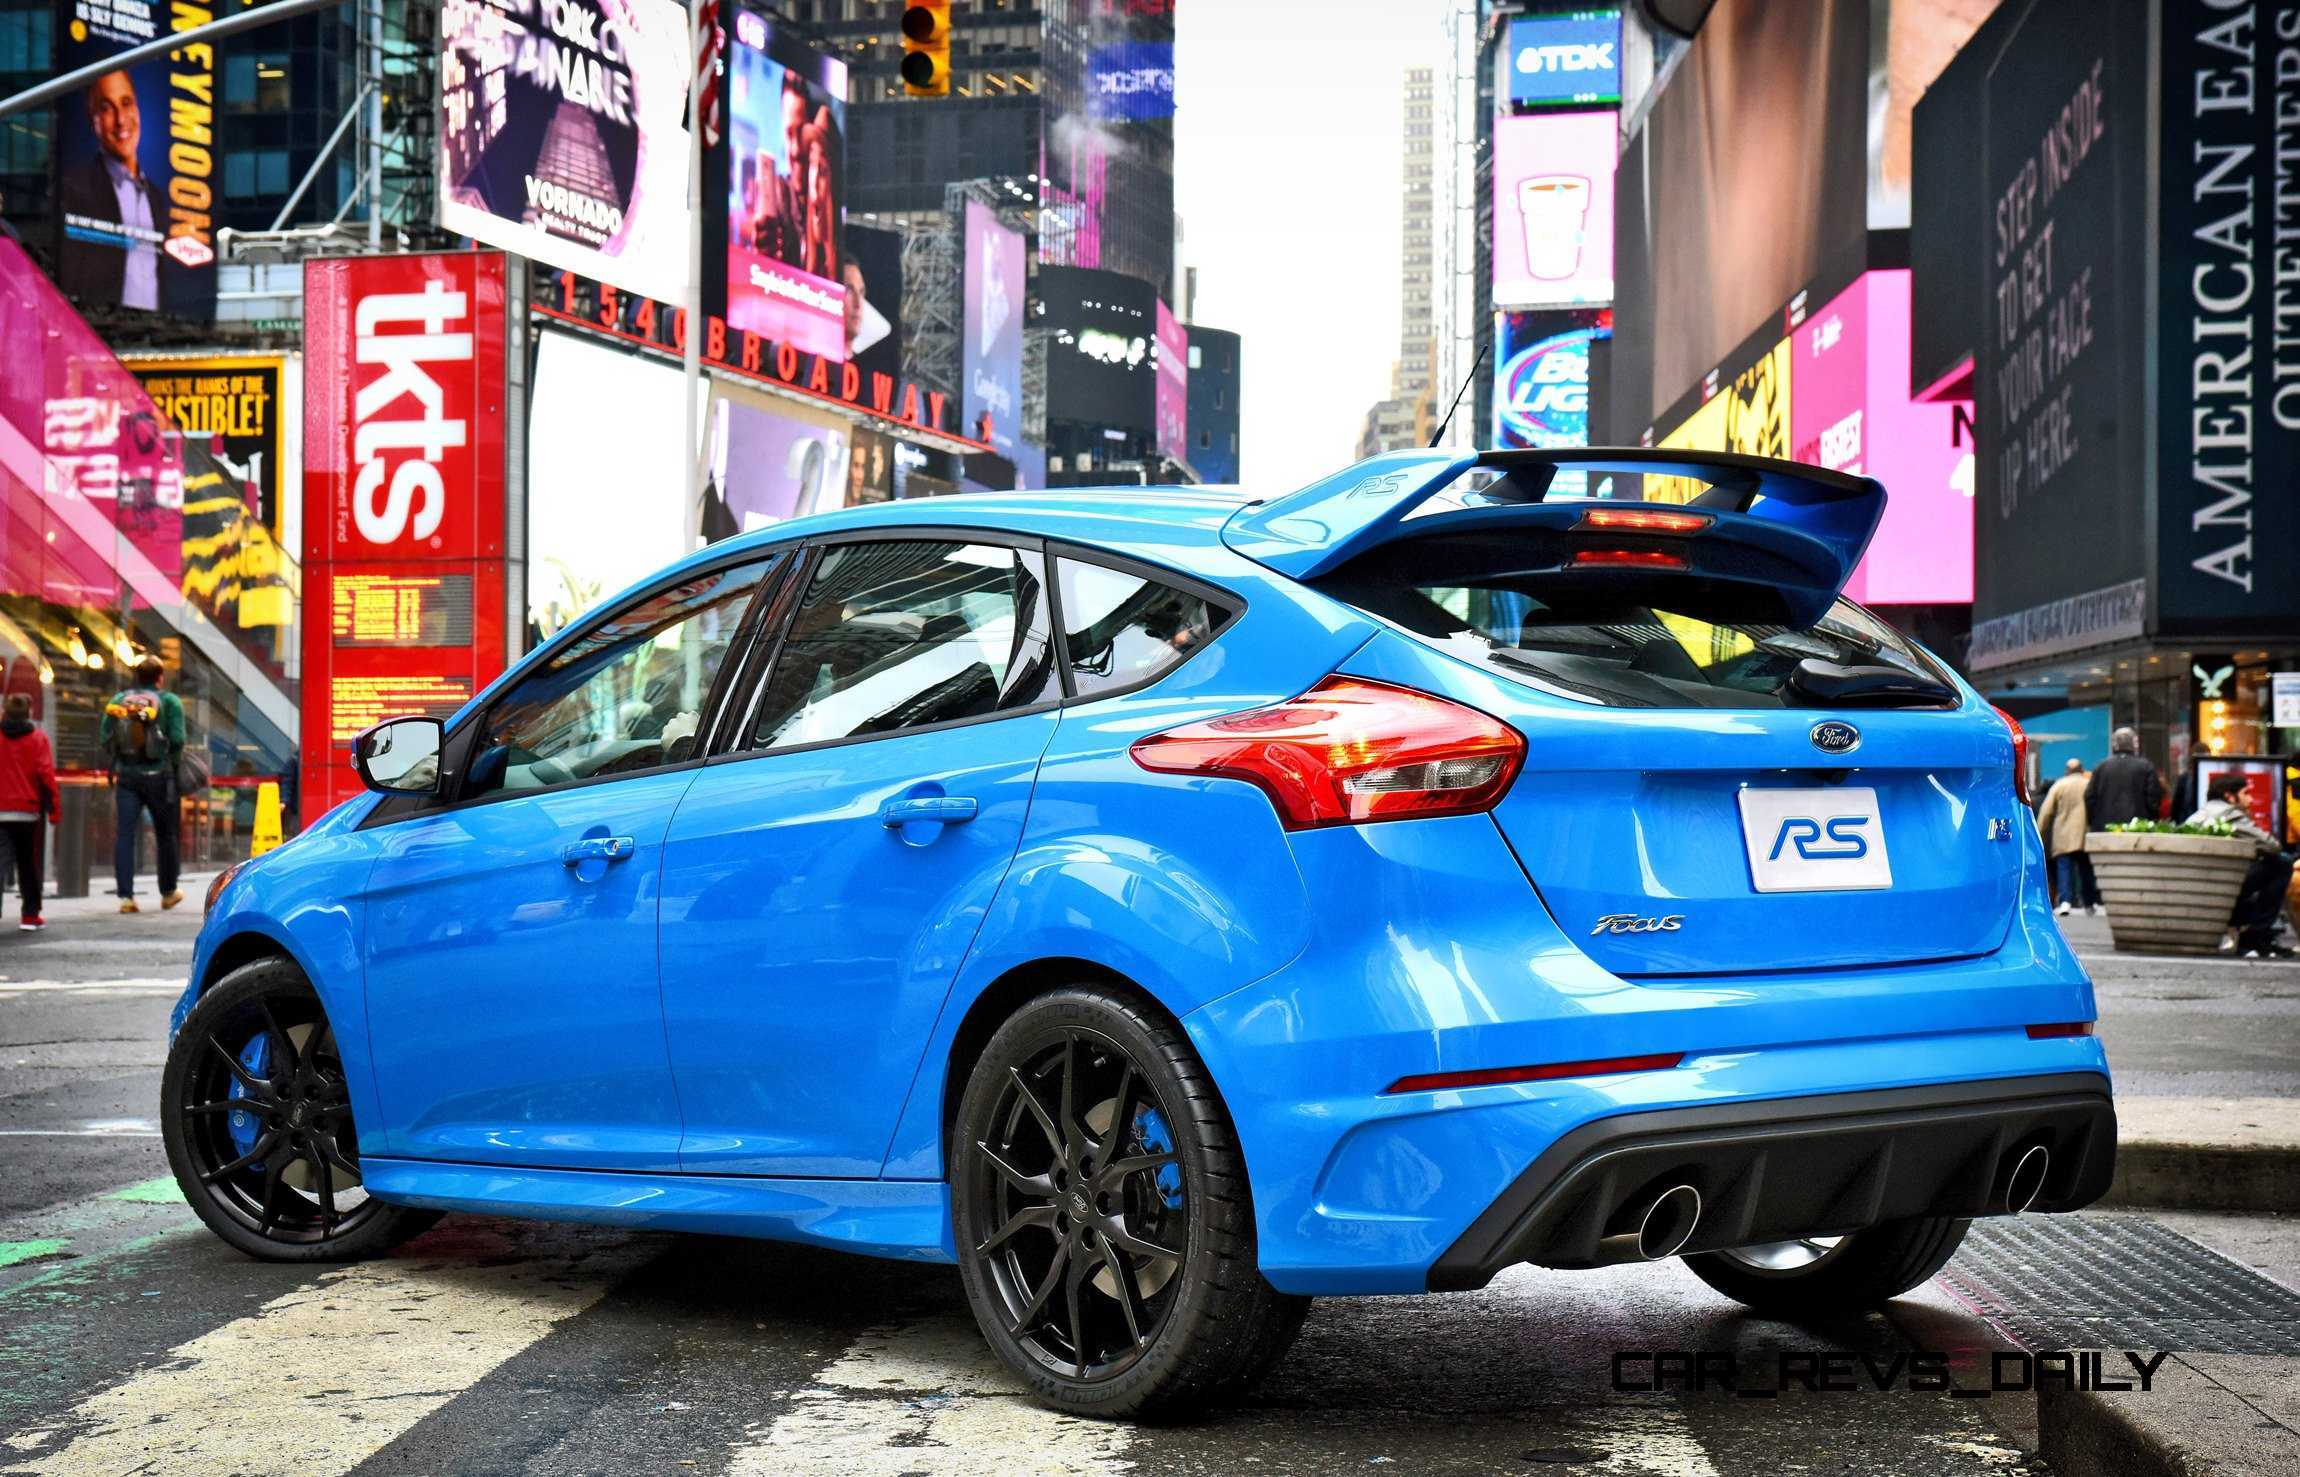 43+ 2016 Ford Focus Rs Wallpaper 1366x768 HD download